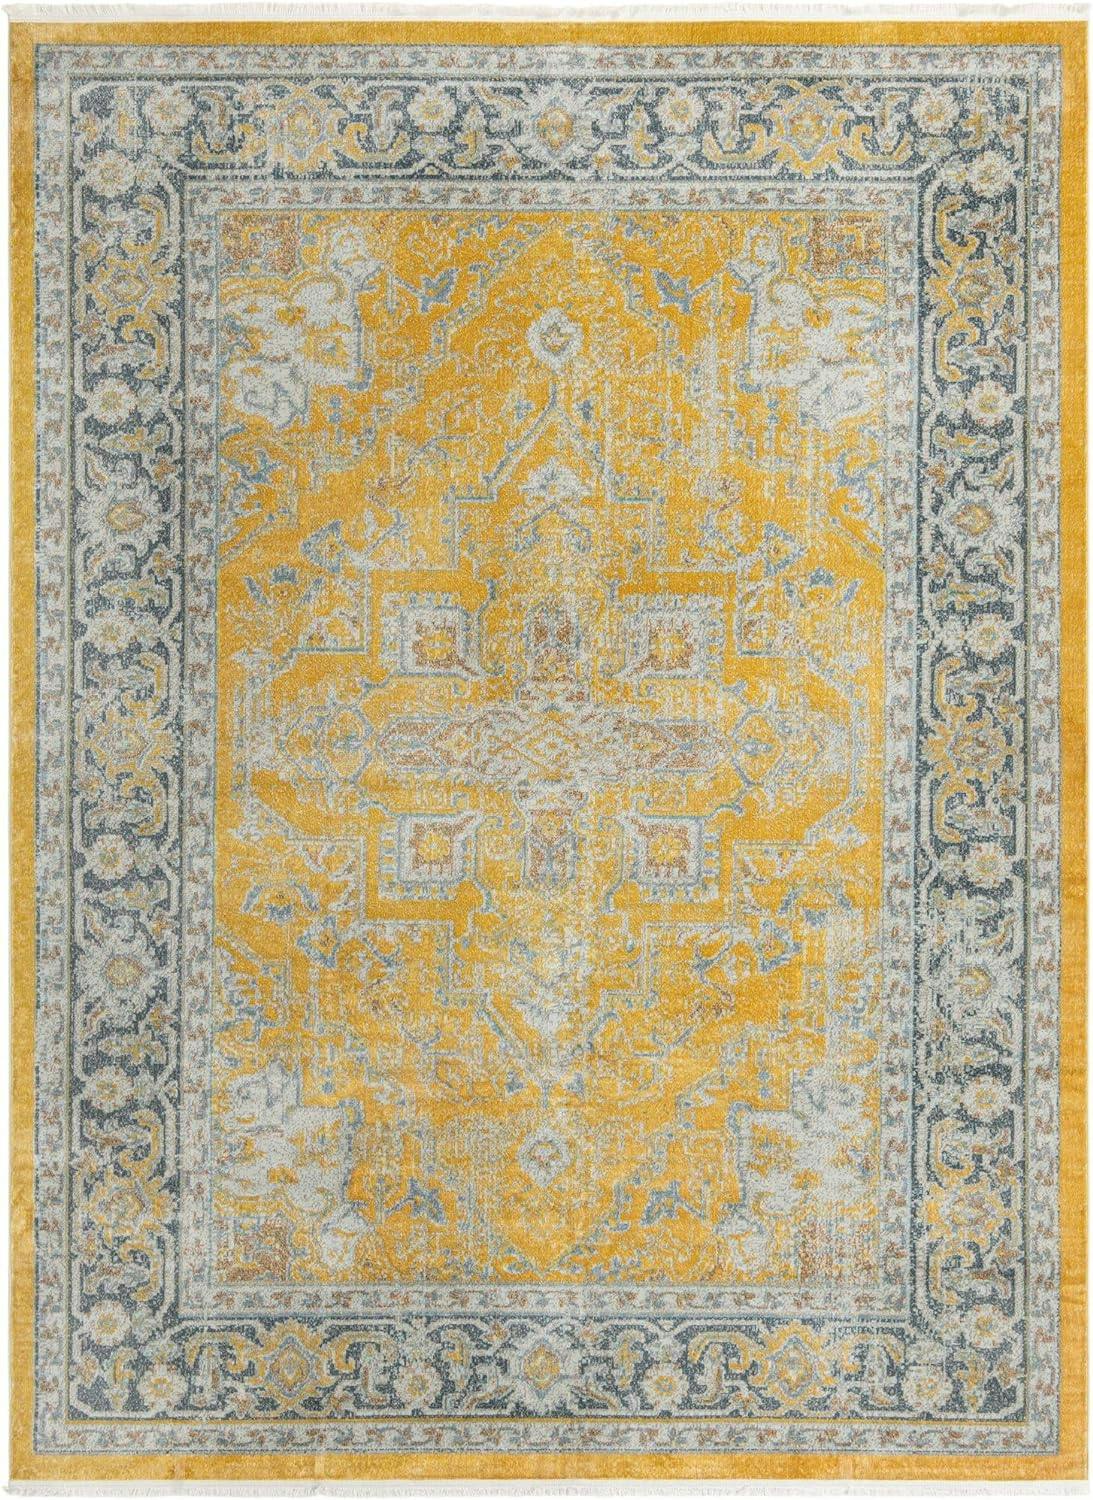 Santiago Vibrant Yellow 9' x 12' Easy-Care Synthetic Area Rug